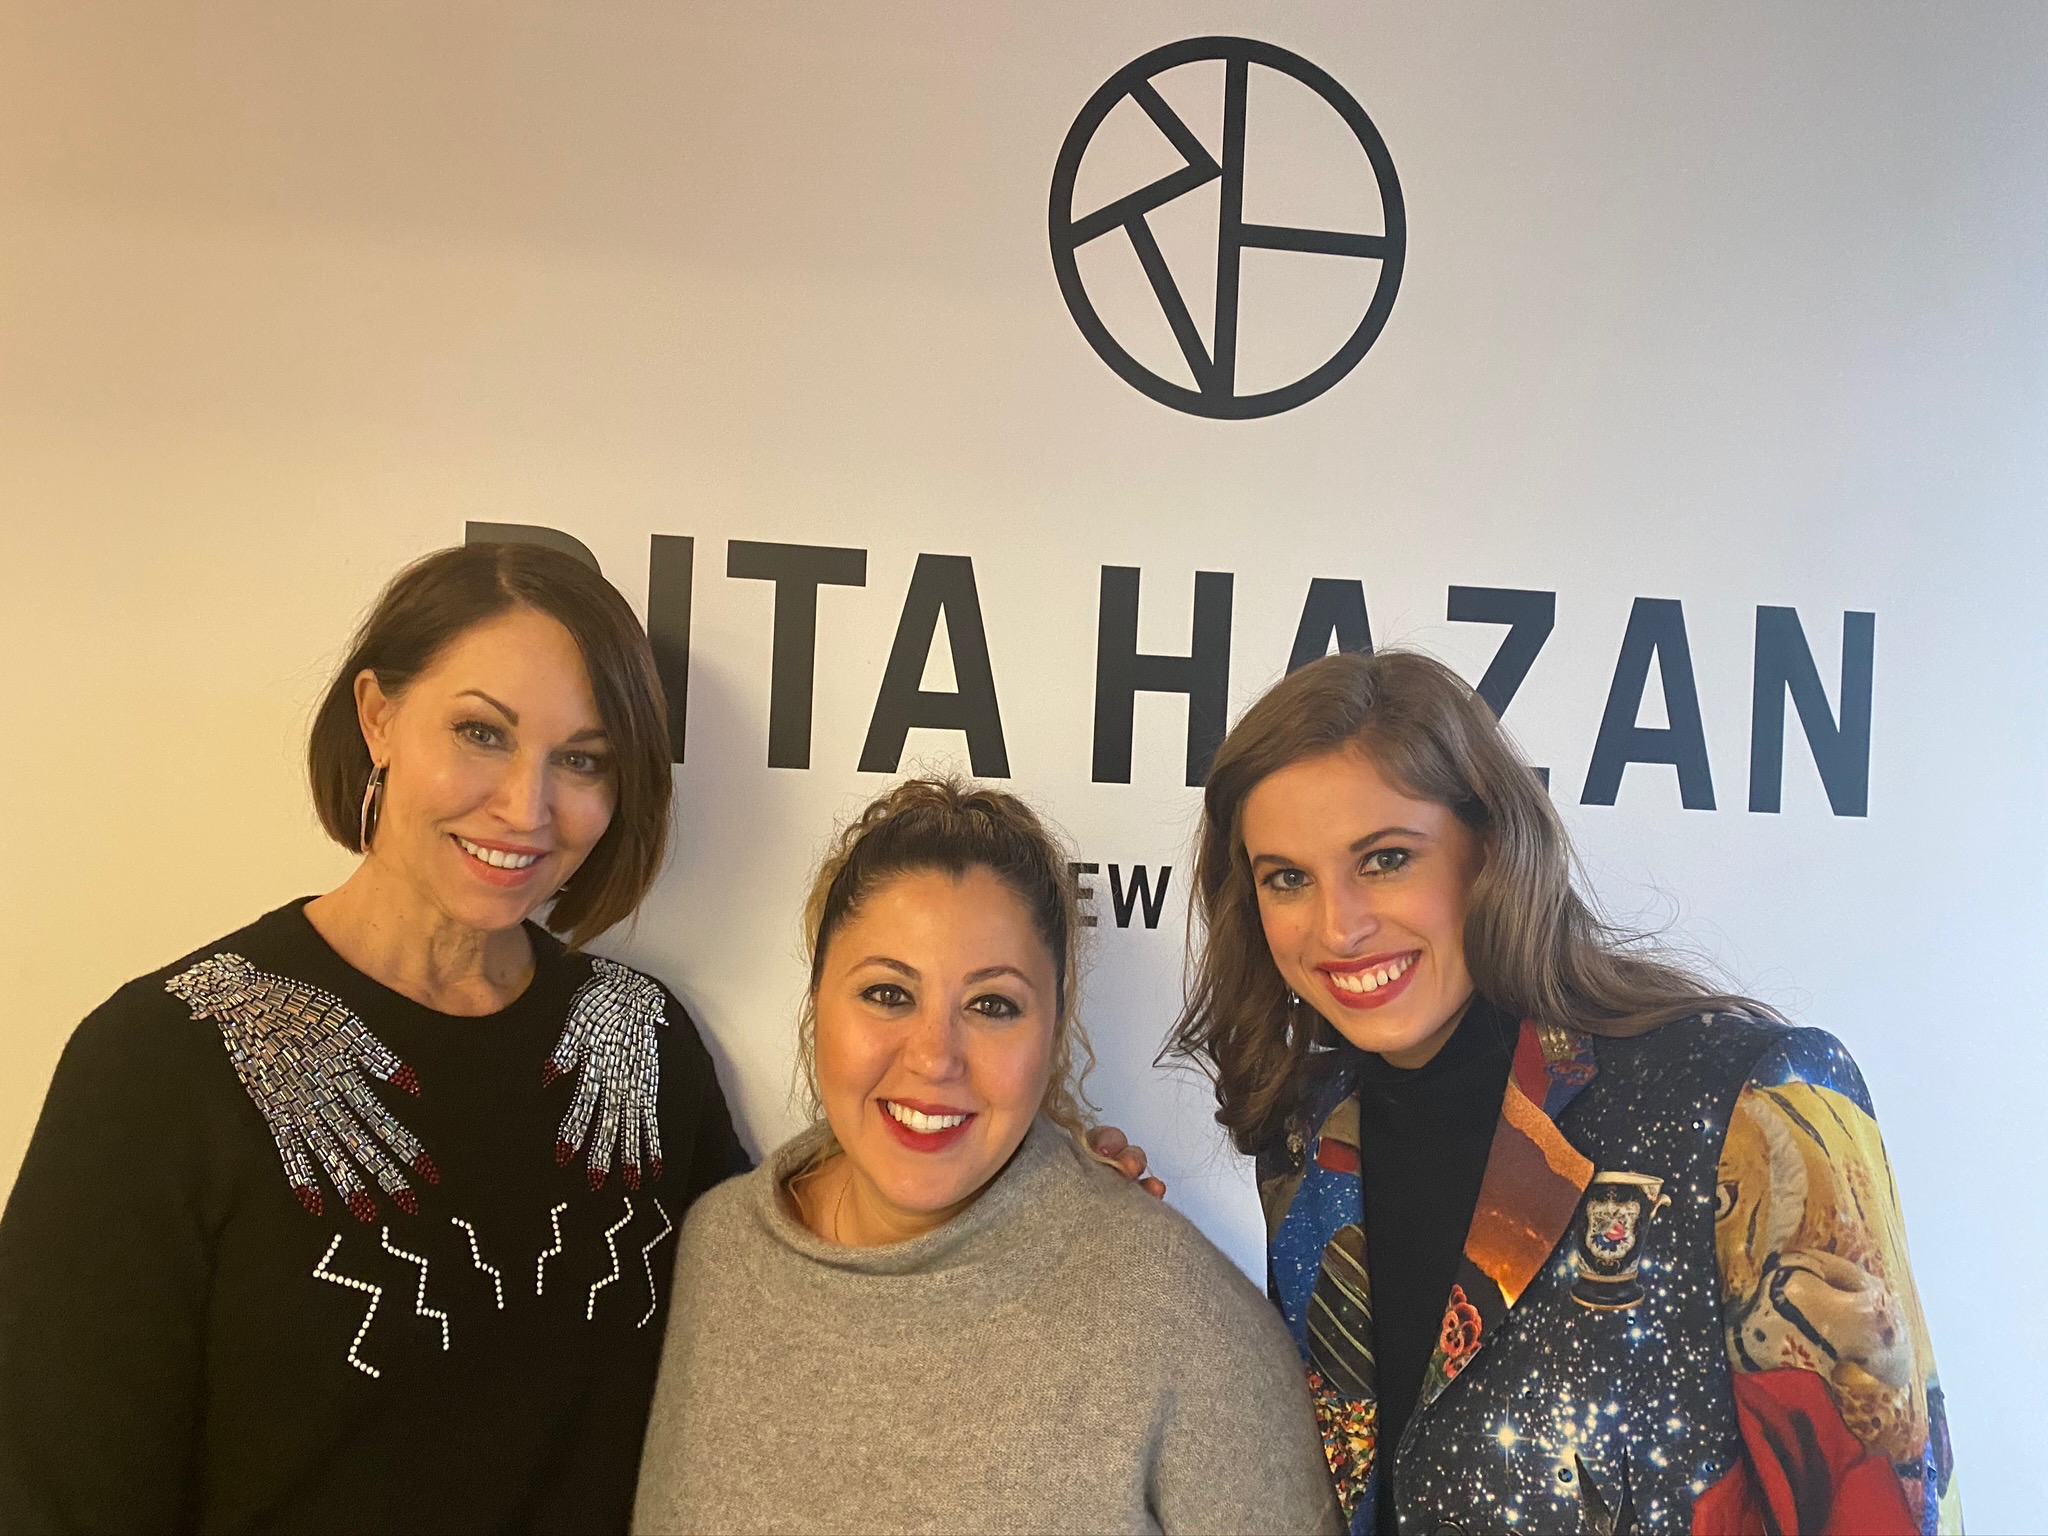 Three women: one in a black sweater with crystal hands, a woman in a grey sweater (Rita Hazan) and a woman in a colorful blazer